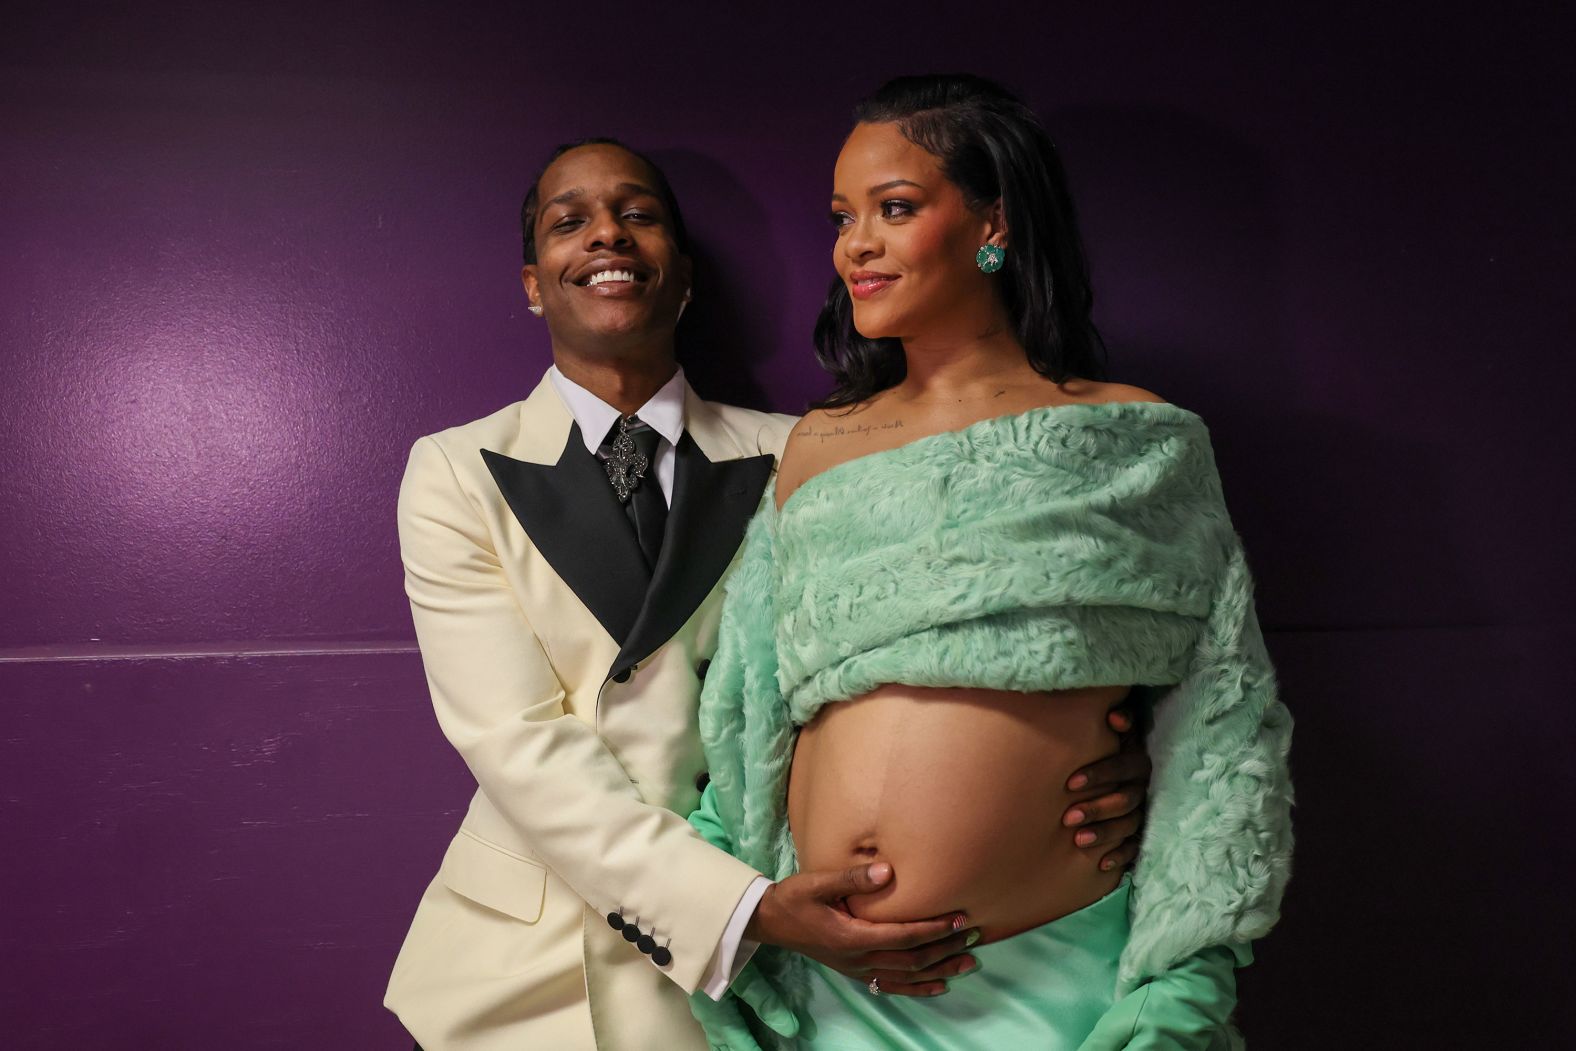 A$AP Rocky puts his hand on Rihanna's belly backstage at the <a href="index.php?page=&url=https%3A%2F%2Fwww.cnn.com%2F2023%2F03%2F12%2Fentertainment%2Fgallery%2F2023-academy-awards-ceremony%2Findex.html" target="_blank">Academy Awards</a> on Sunday, March 12. The two are expecting their second child together. During the show, Rihanna performed "Lift Me Up," her Oscar-nominated song from "Black Panther: Wakanda Forever."